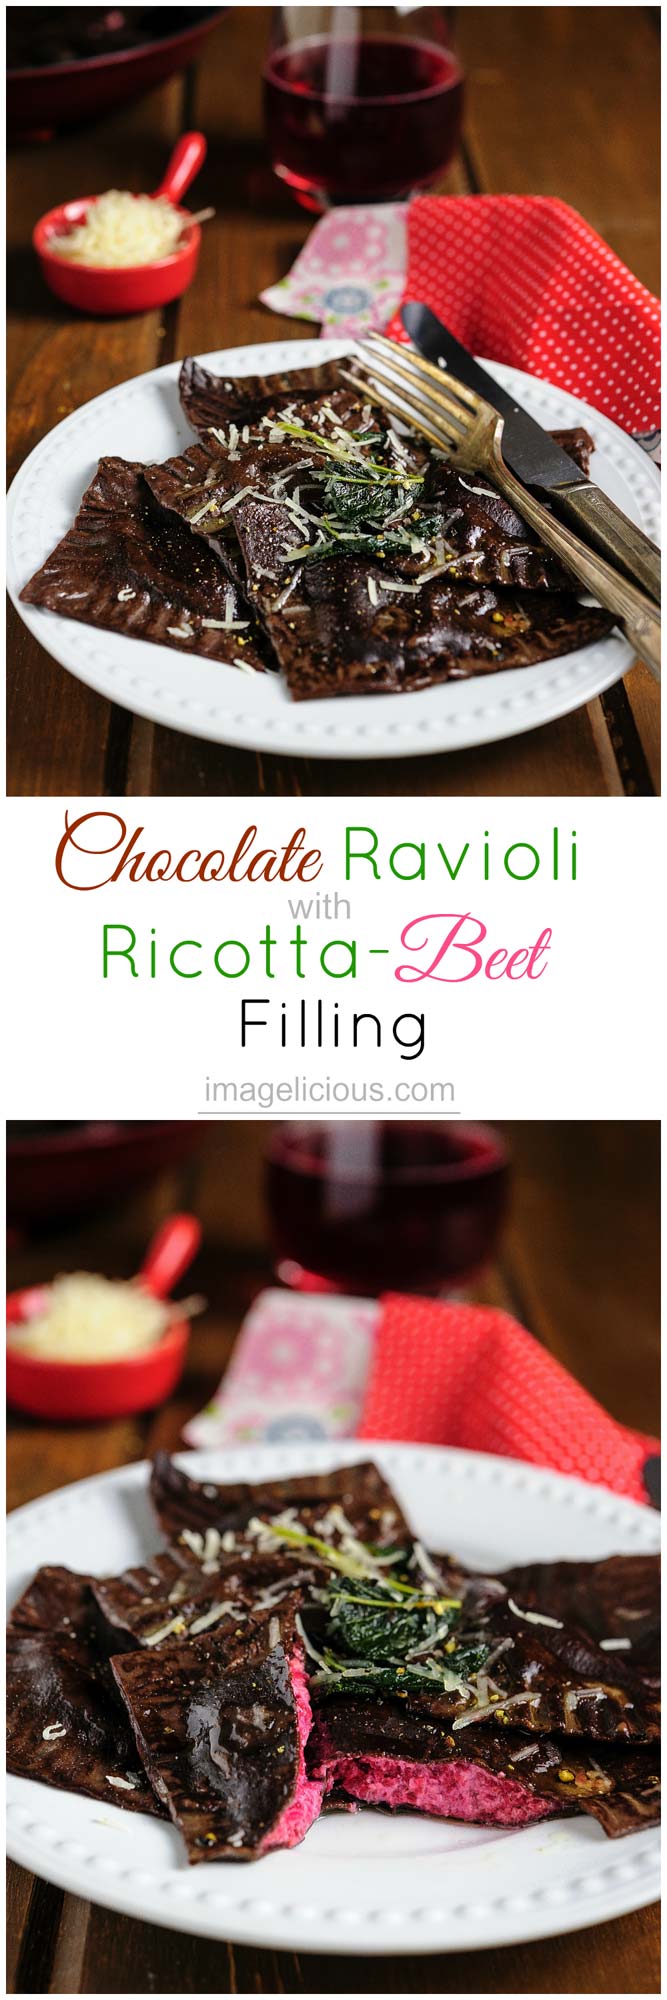 These Chocolate Ravioli with Ricotta-Beet Filling are beautiful, delicious, and healthy. Perfect for the Valentine's Day dinner or any other lazy weekend | Imagelicious